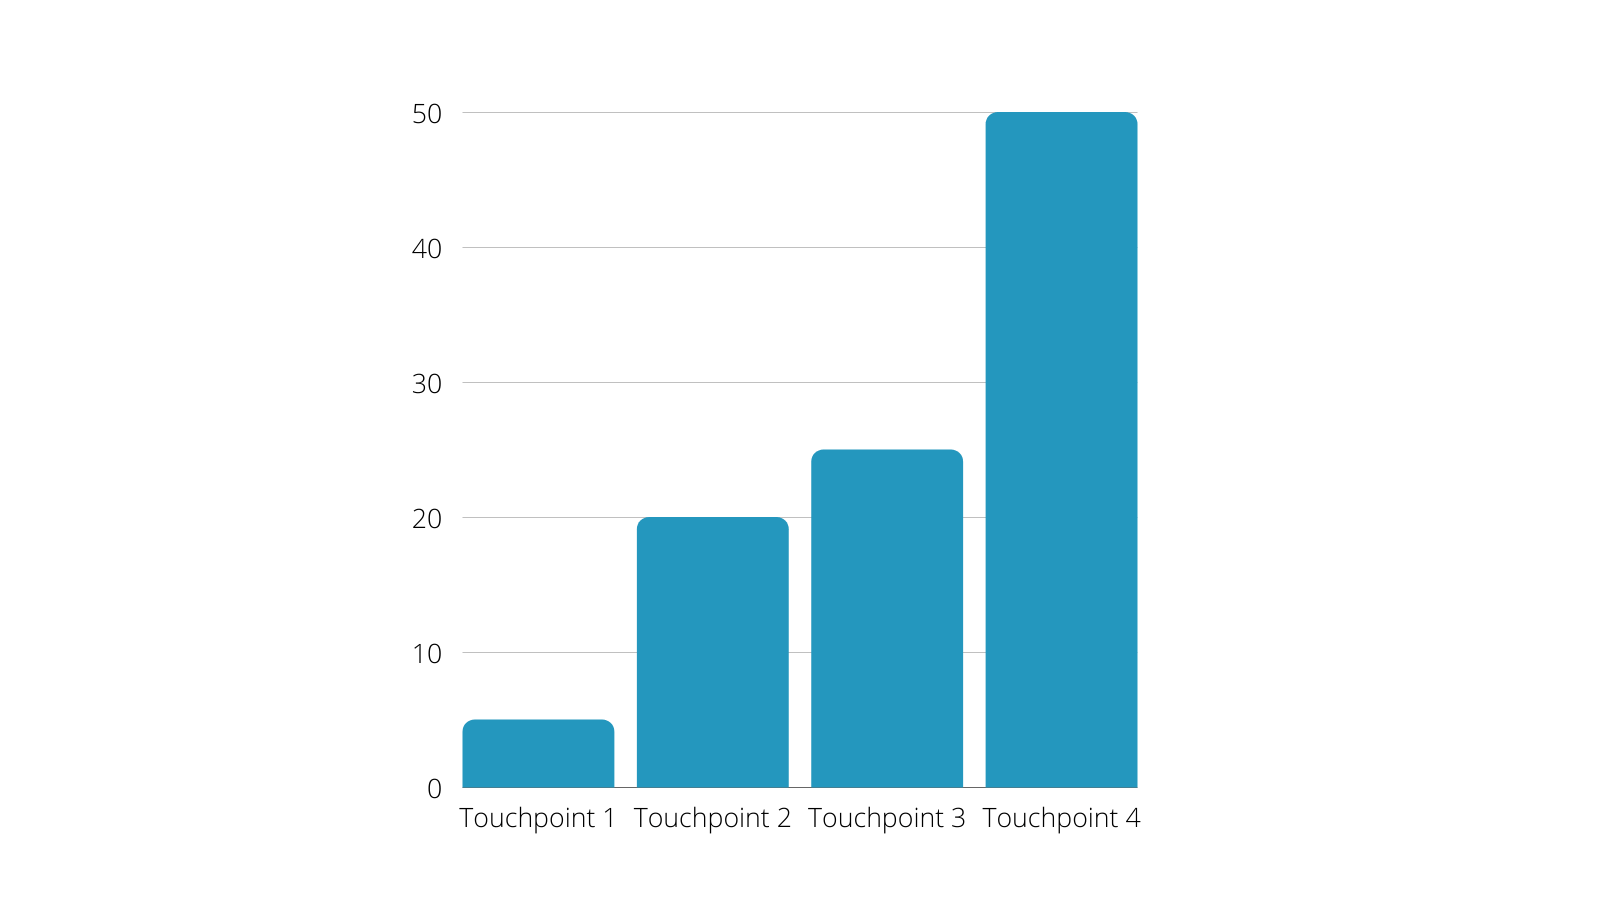 A bar graph with touchpoint 1 at 5, touchpoint 2 at 20, touchpoint 3 at 25, and touchpoint 4 at 50